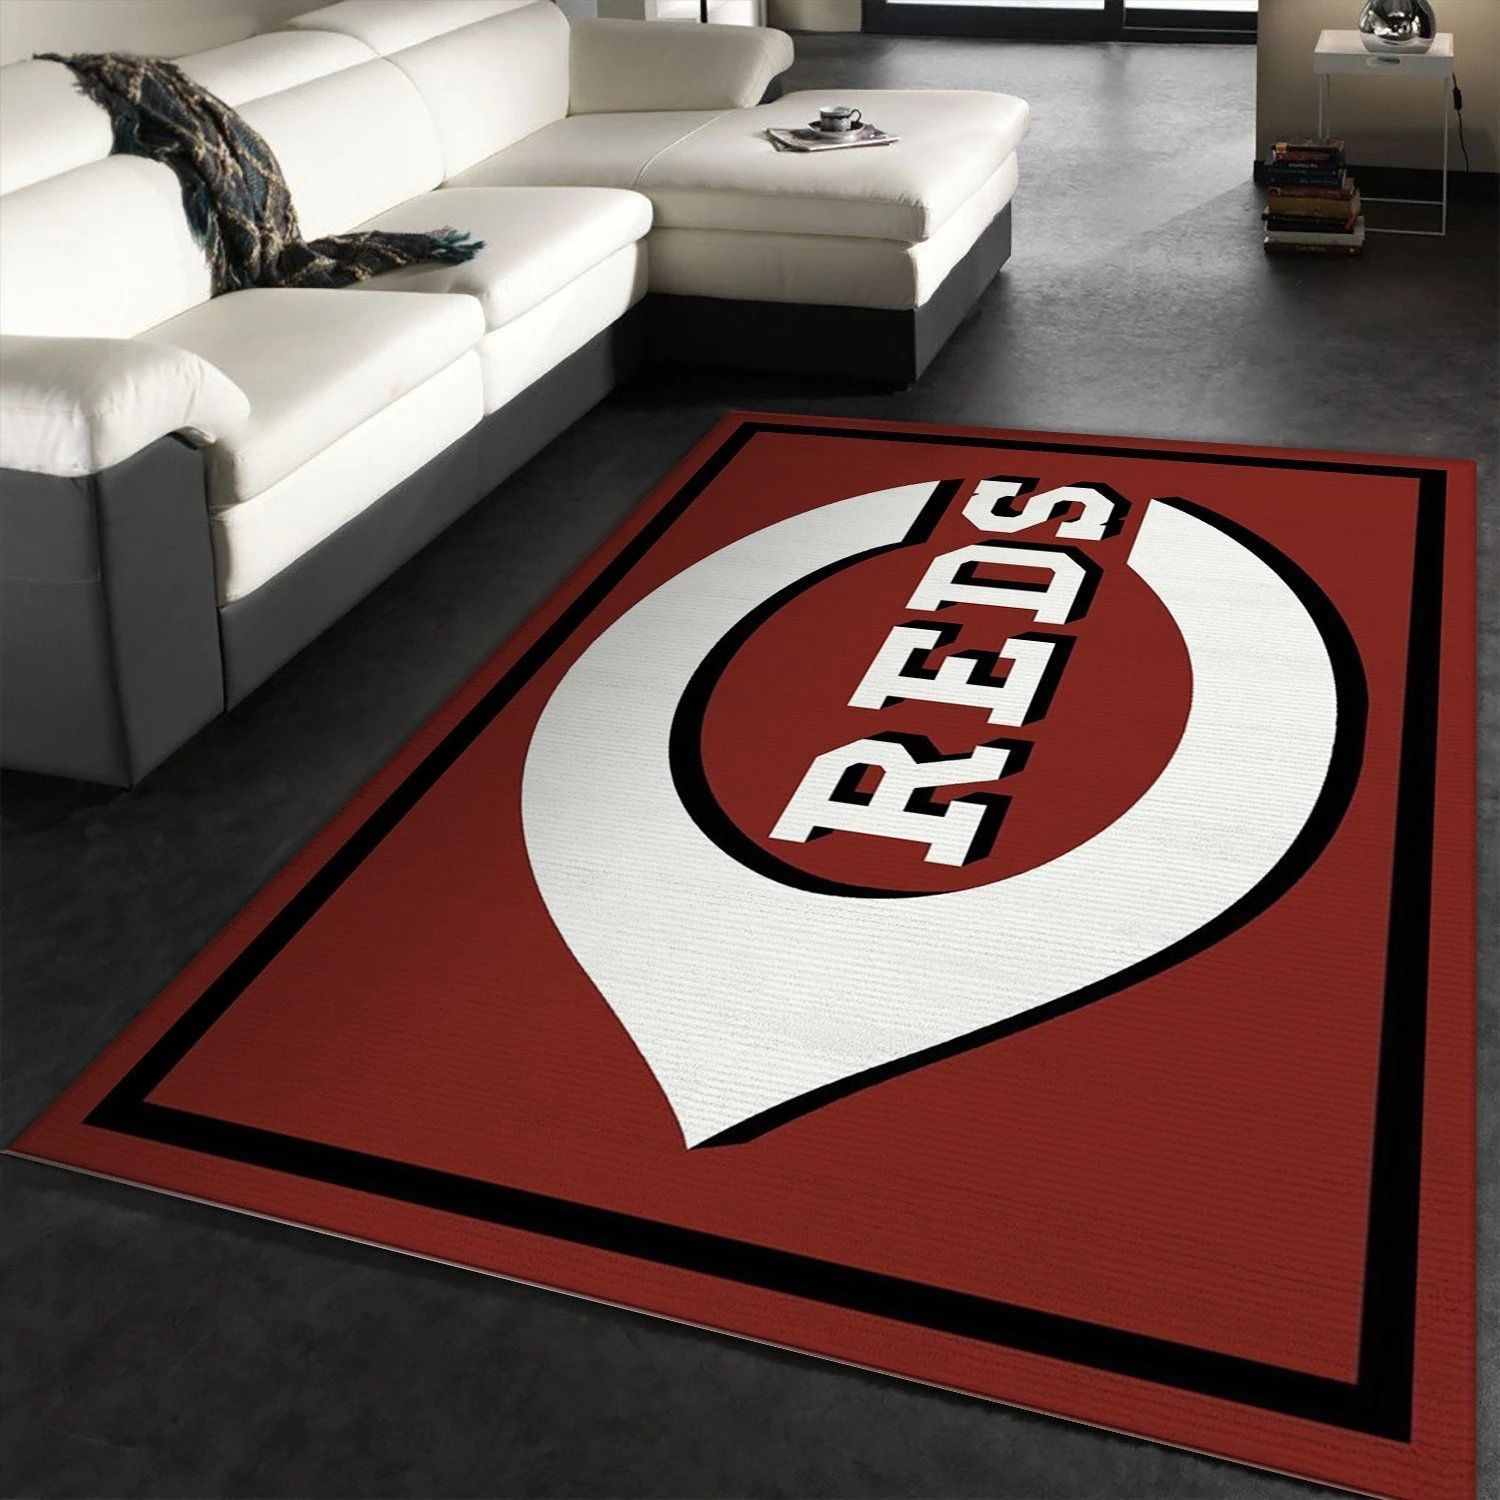 Cincinnati Reds Imperial Spirit MLB Rug Area Rug, Living room and bedroom Rug, Family Gift US Decor - Indoor Outdoor Rugs 1